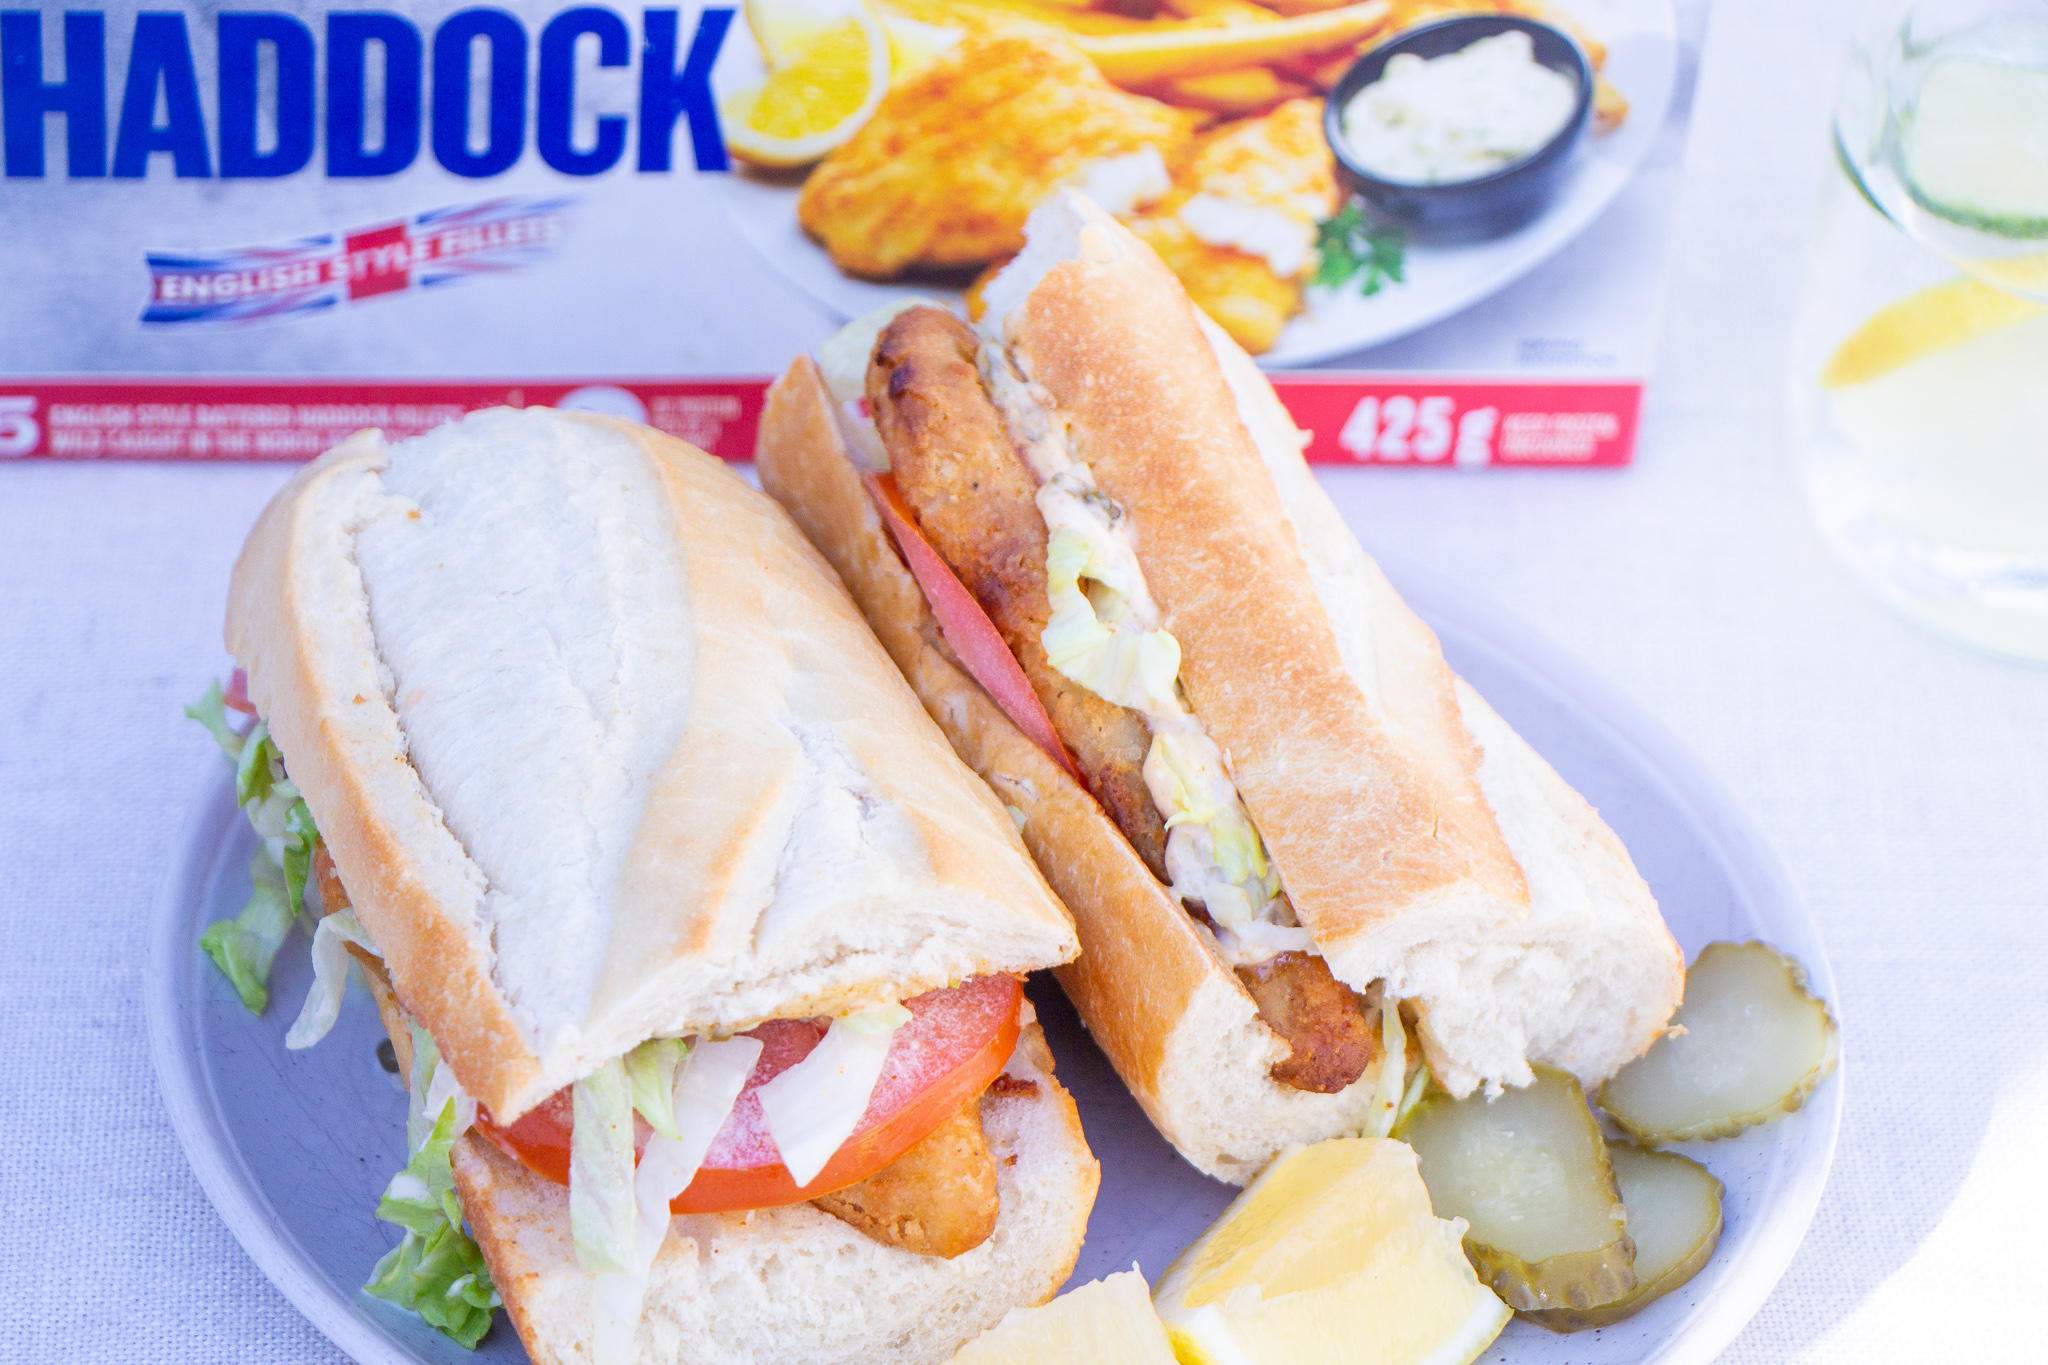 High Liner's Signature Cuts® English Style Battered Haddock Fillets Po’ Boy Sandwich with Cajun Sauce